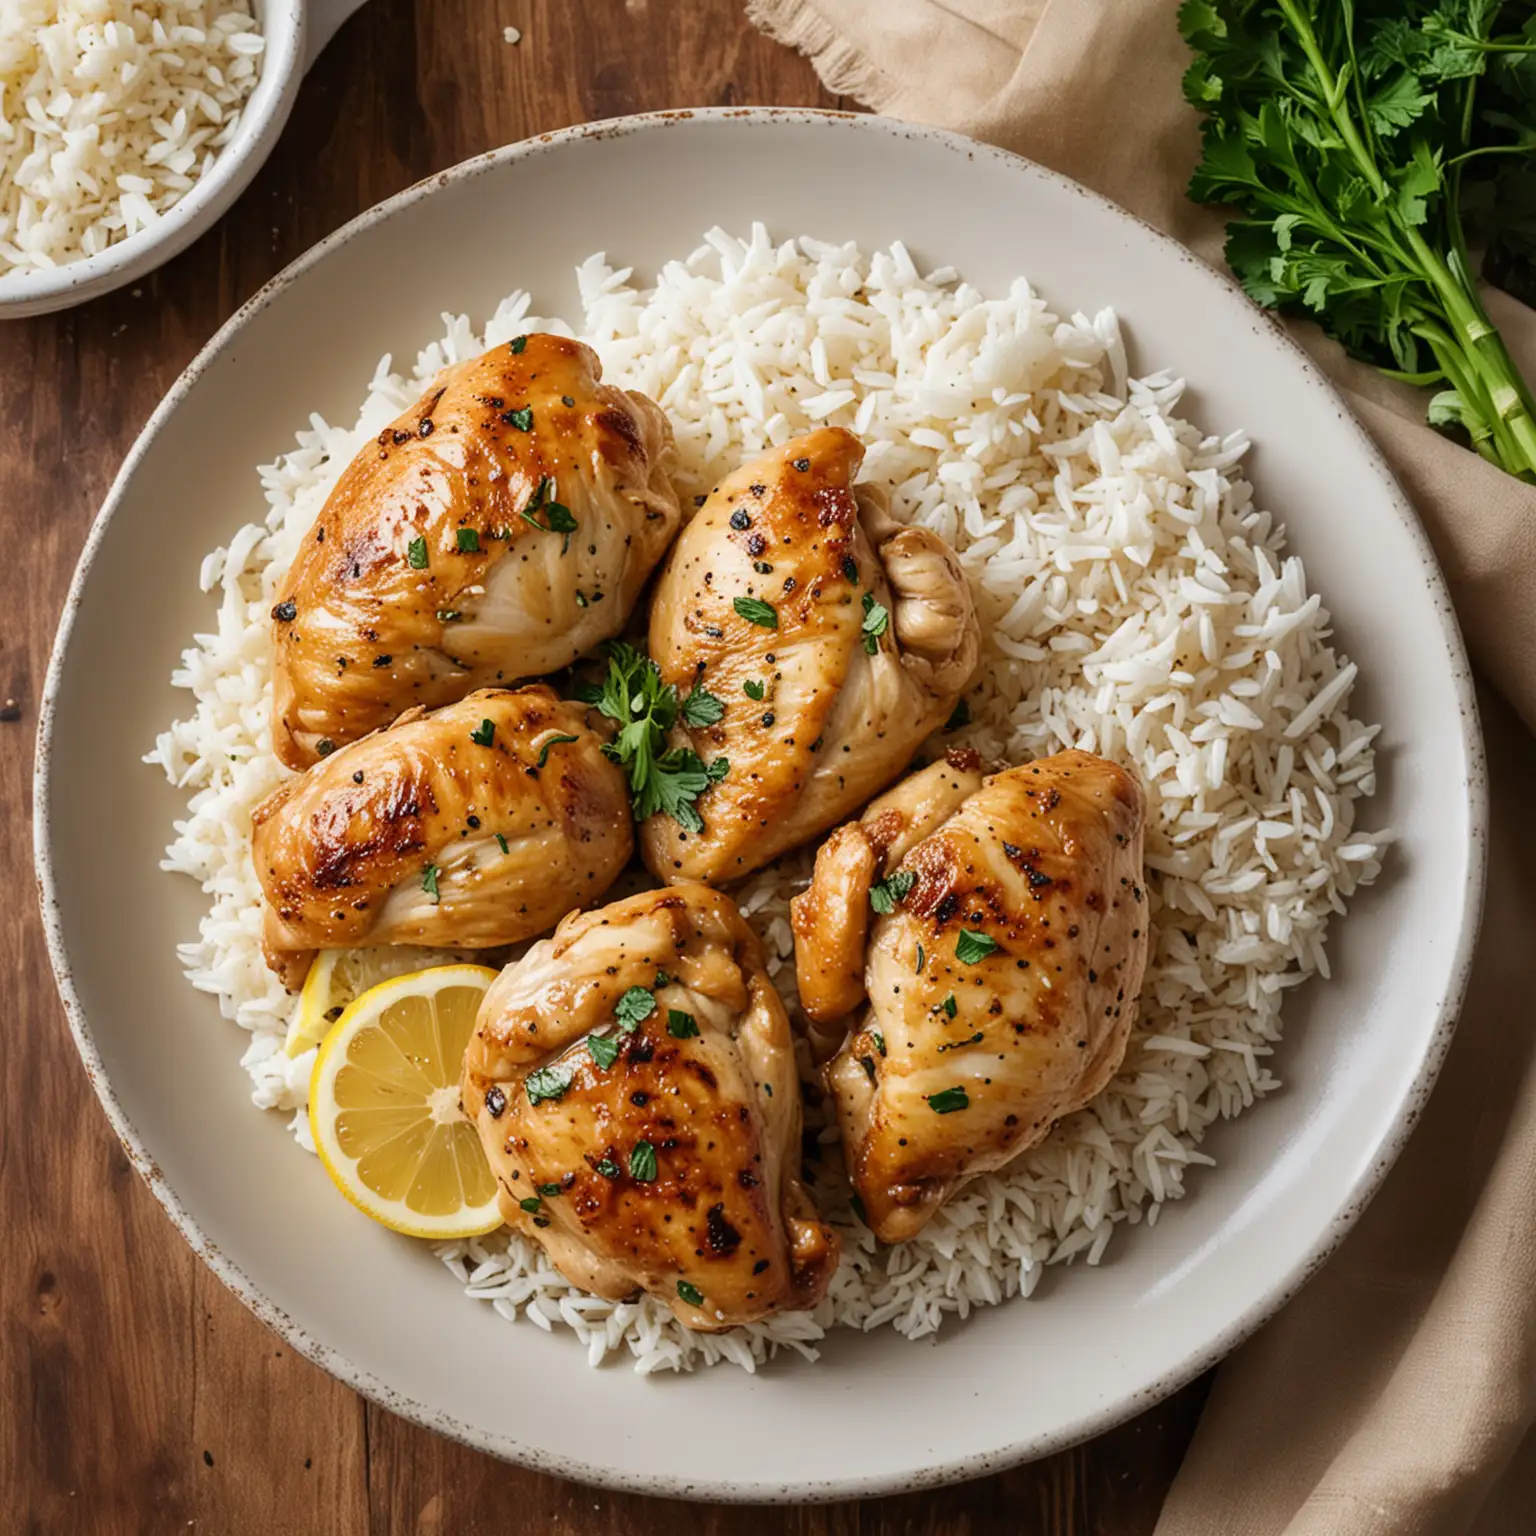 Delicious Lemon Garlic Chicken with Boiled Rice on a Plate